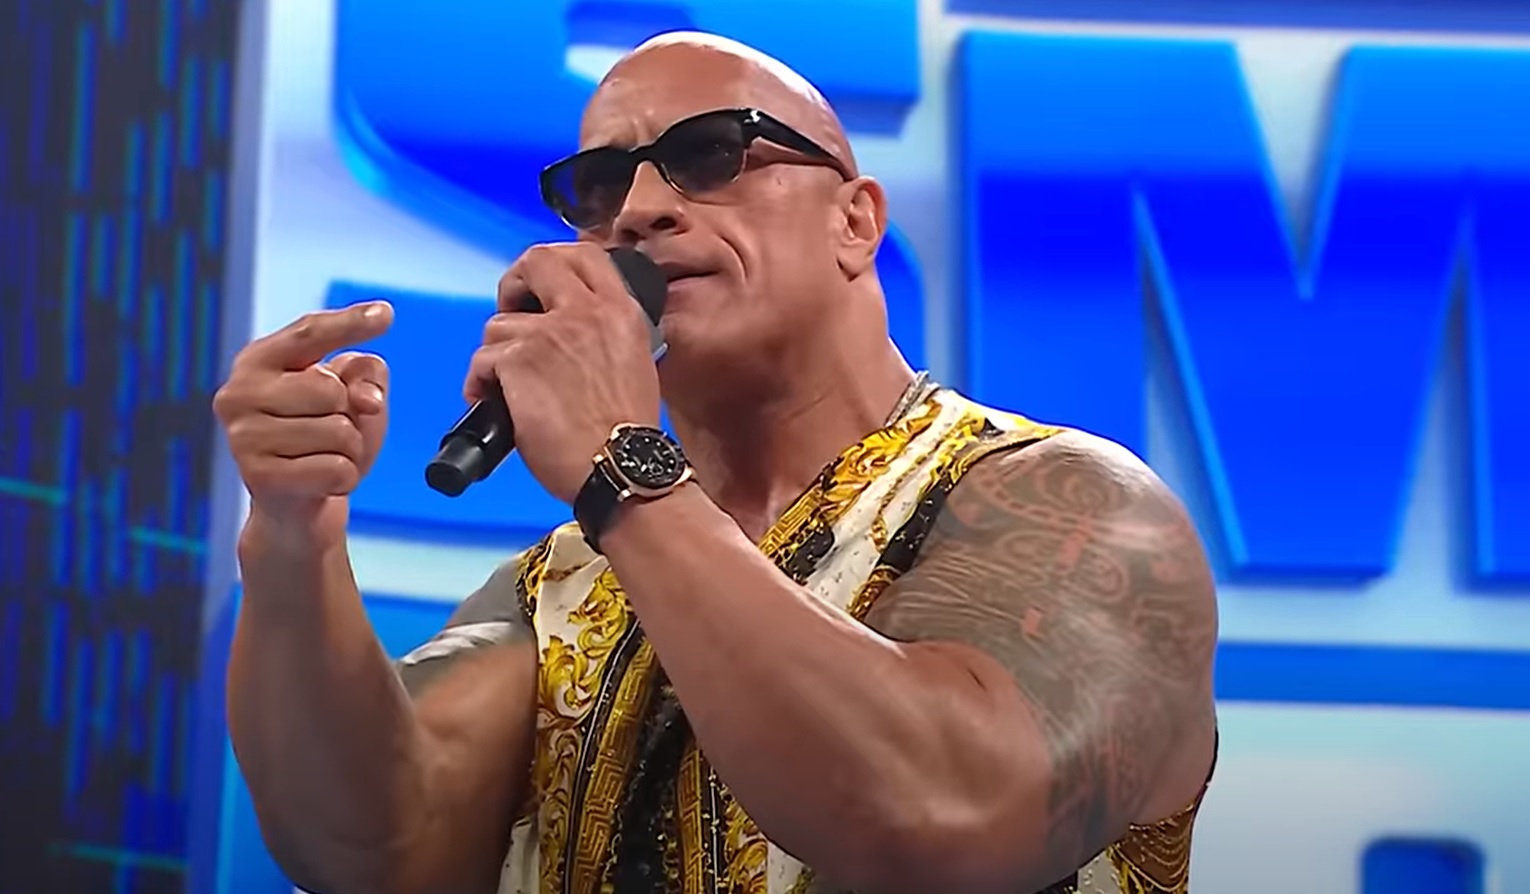 The Rock Lights Up SmackDown: A No-Holds-Barred Concert That Shook the WWE Universe